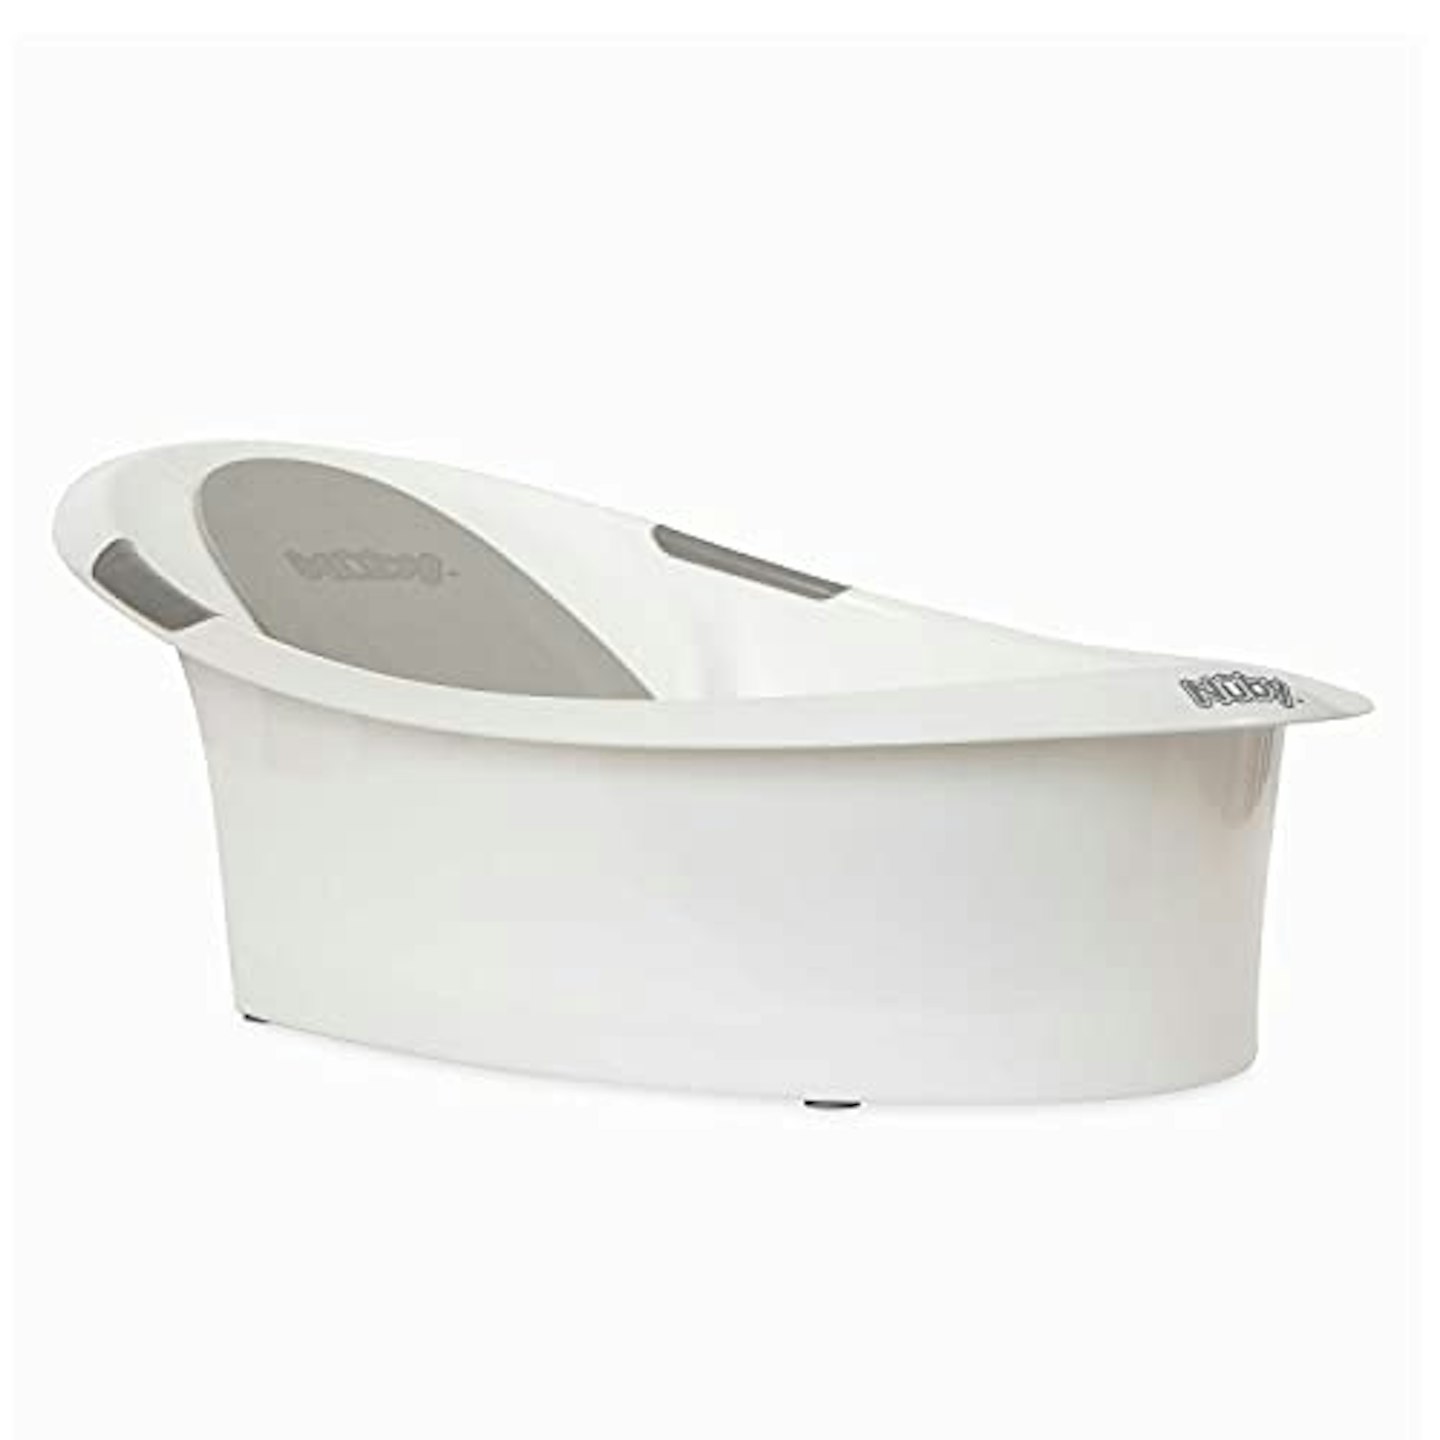 Nuby Baby Bath with Built in Seat and Soft Headrest